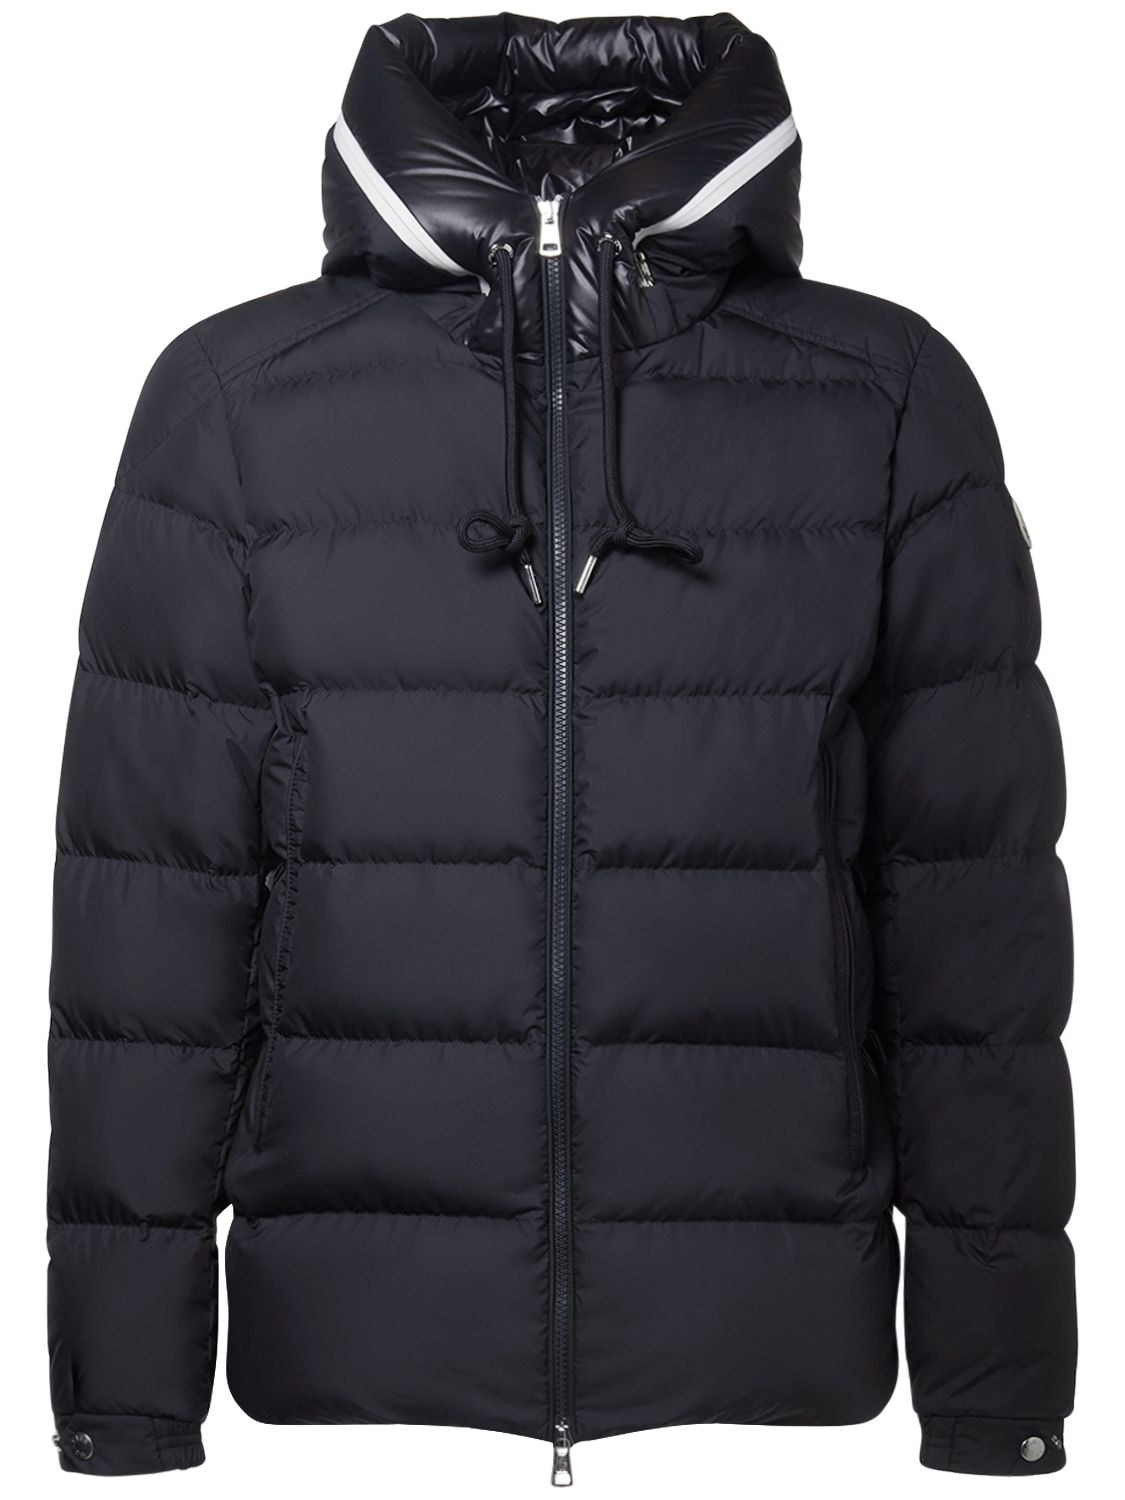 Image of Cardere Tech Down Jacket